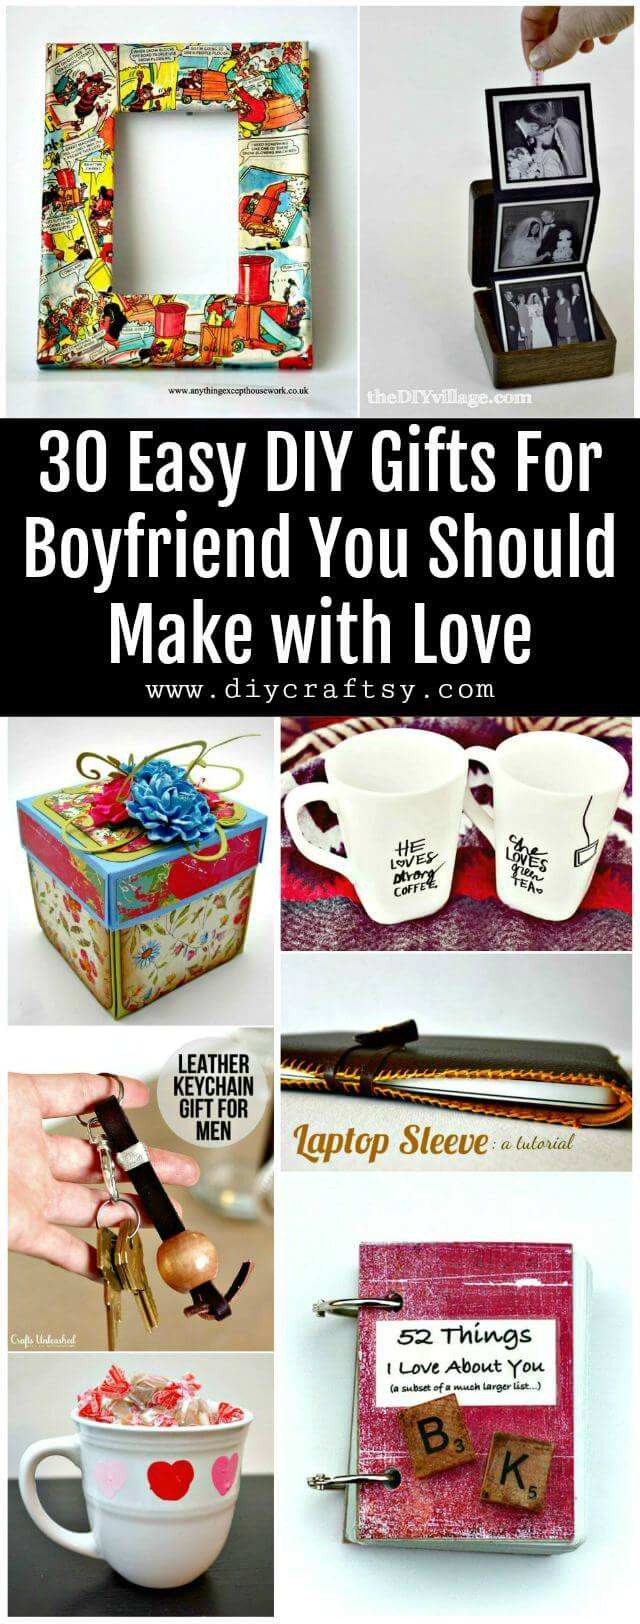 Craft Gift Ideas For Boyfriend
 30 Easy DIY Gifts For Boyfriend You Should Make with Love